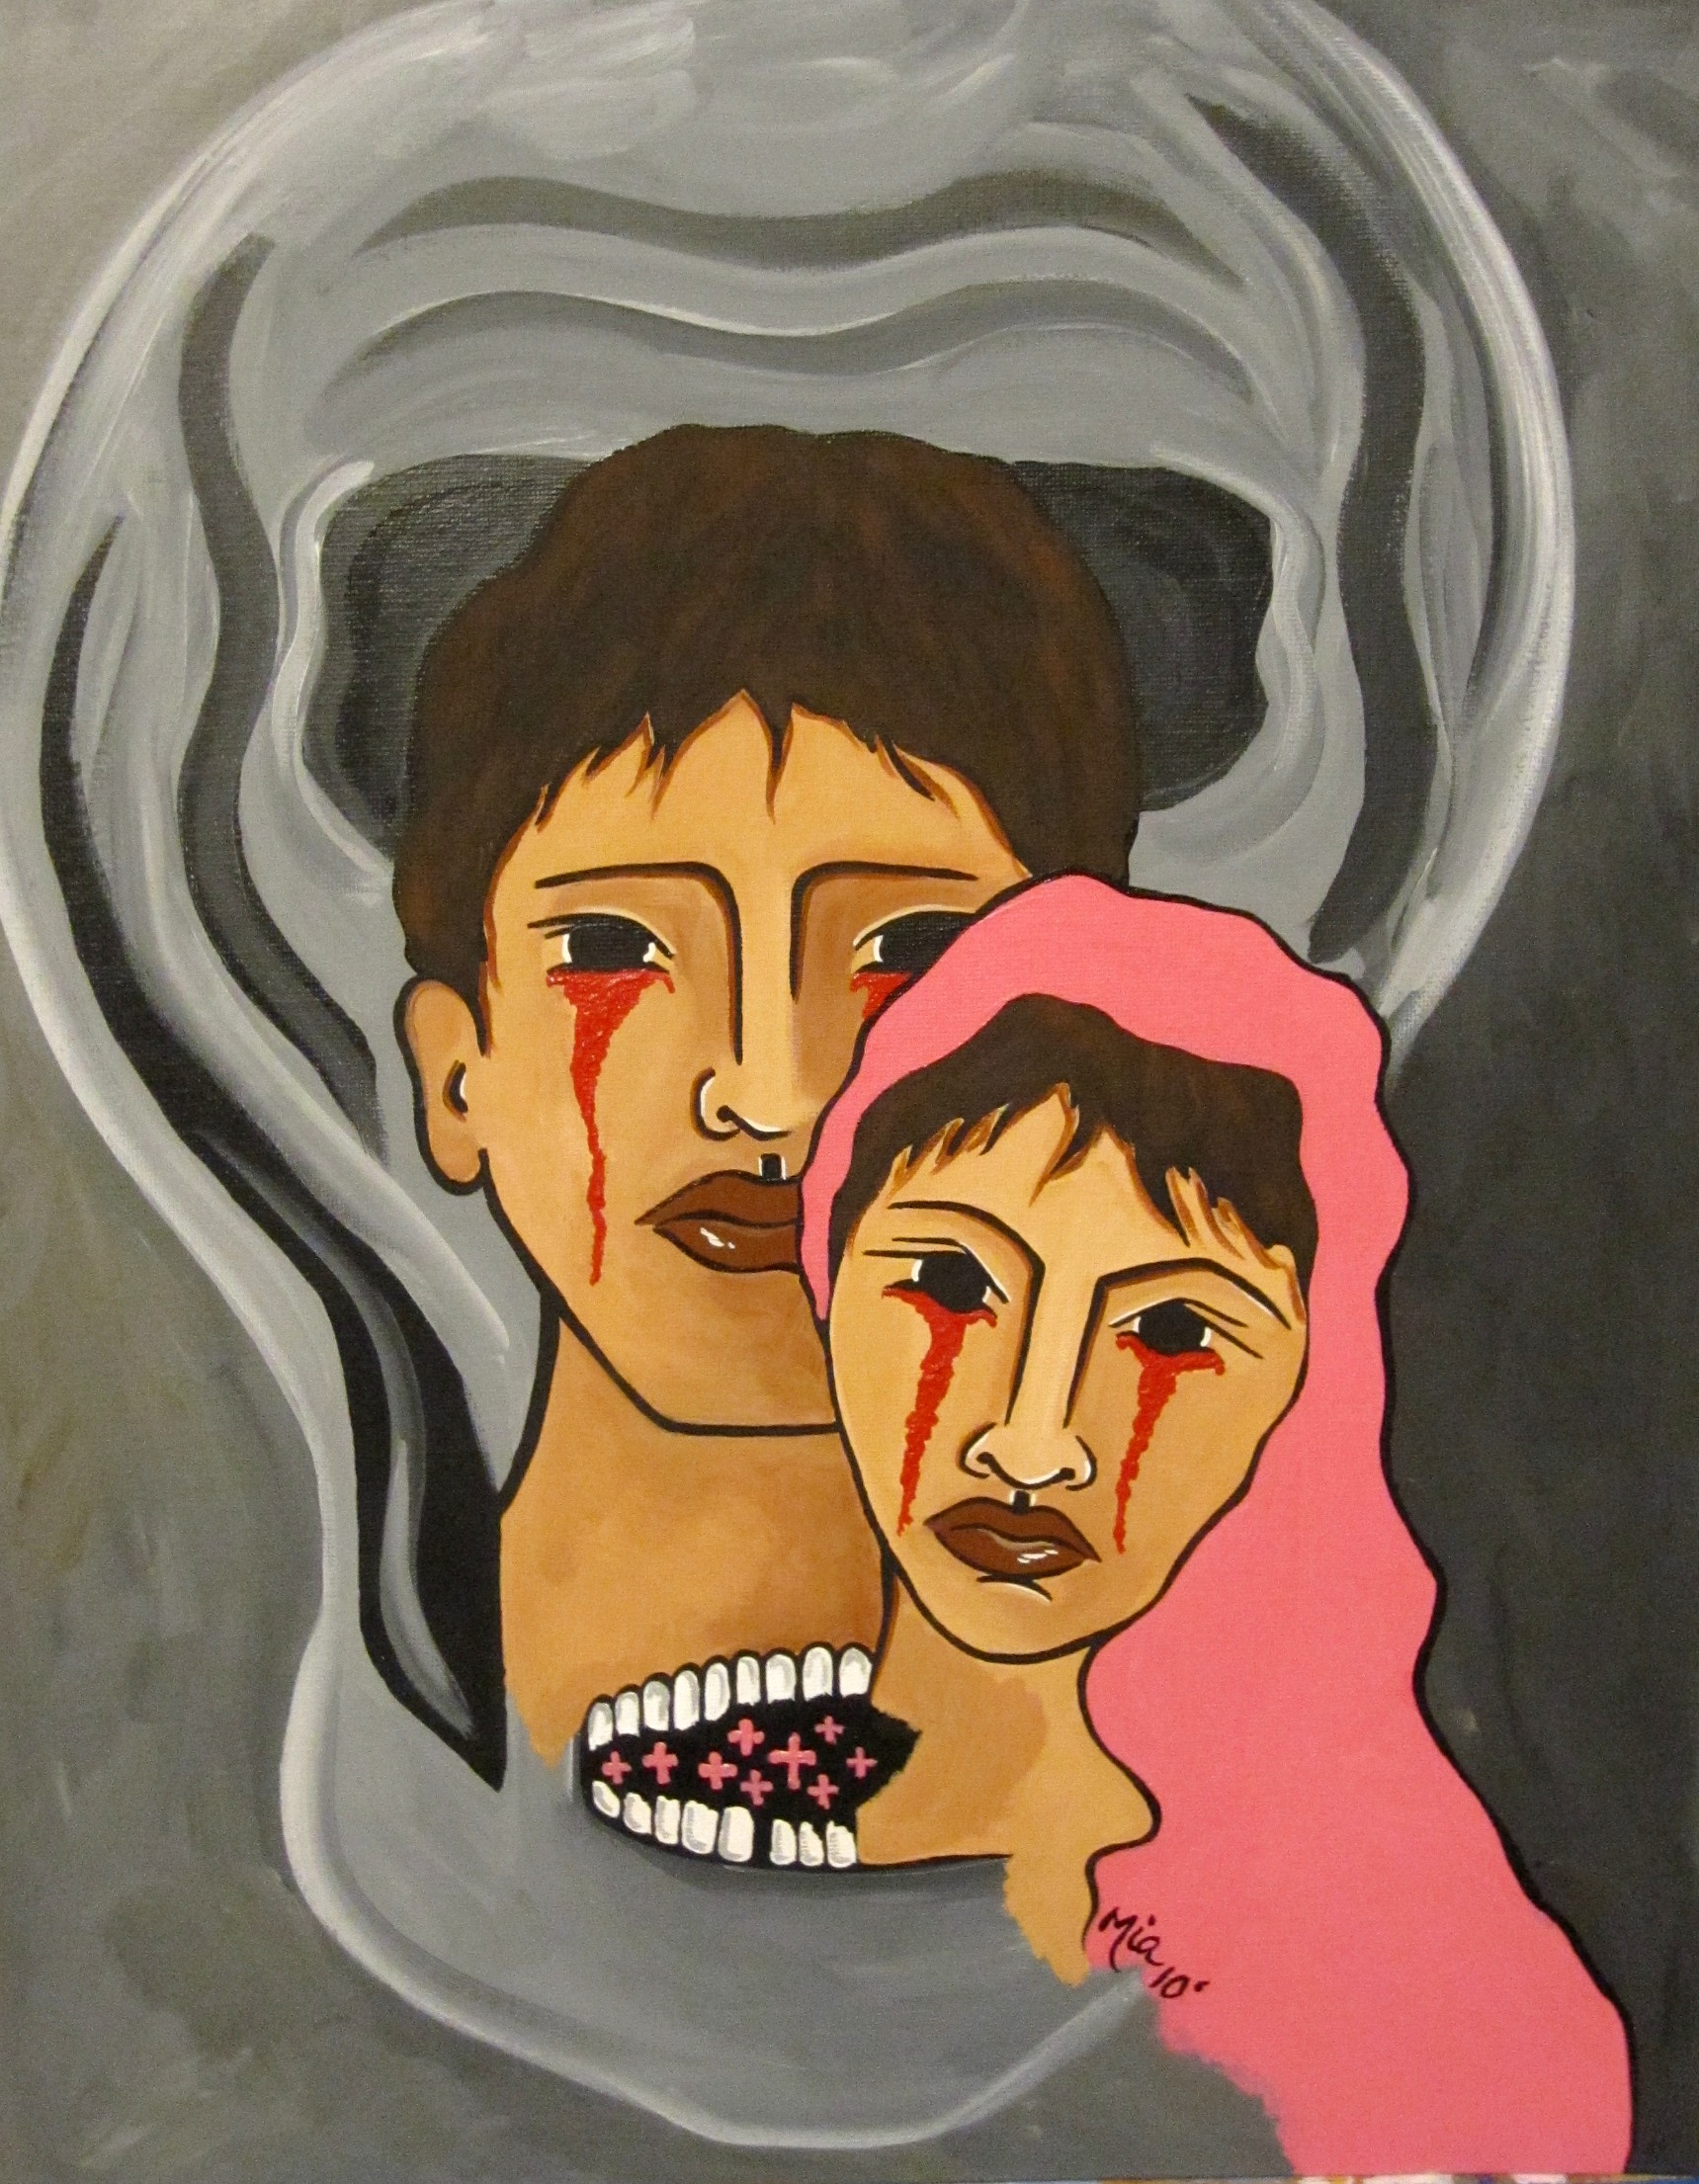 Tears for our Daughters.. FEMICIDE... NI UNA MAS